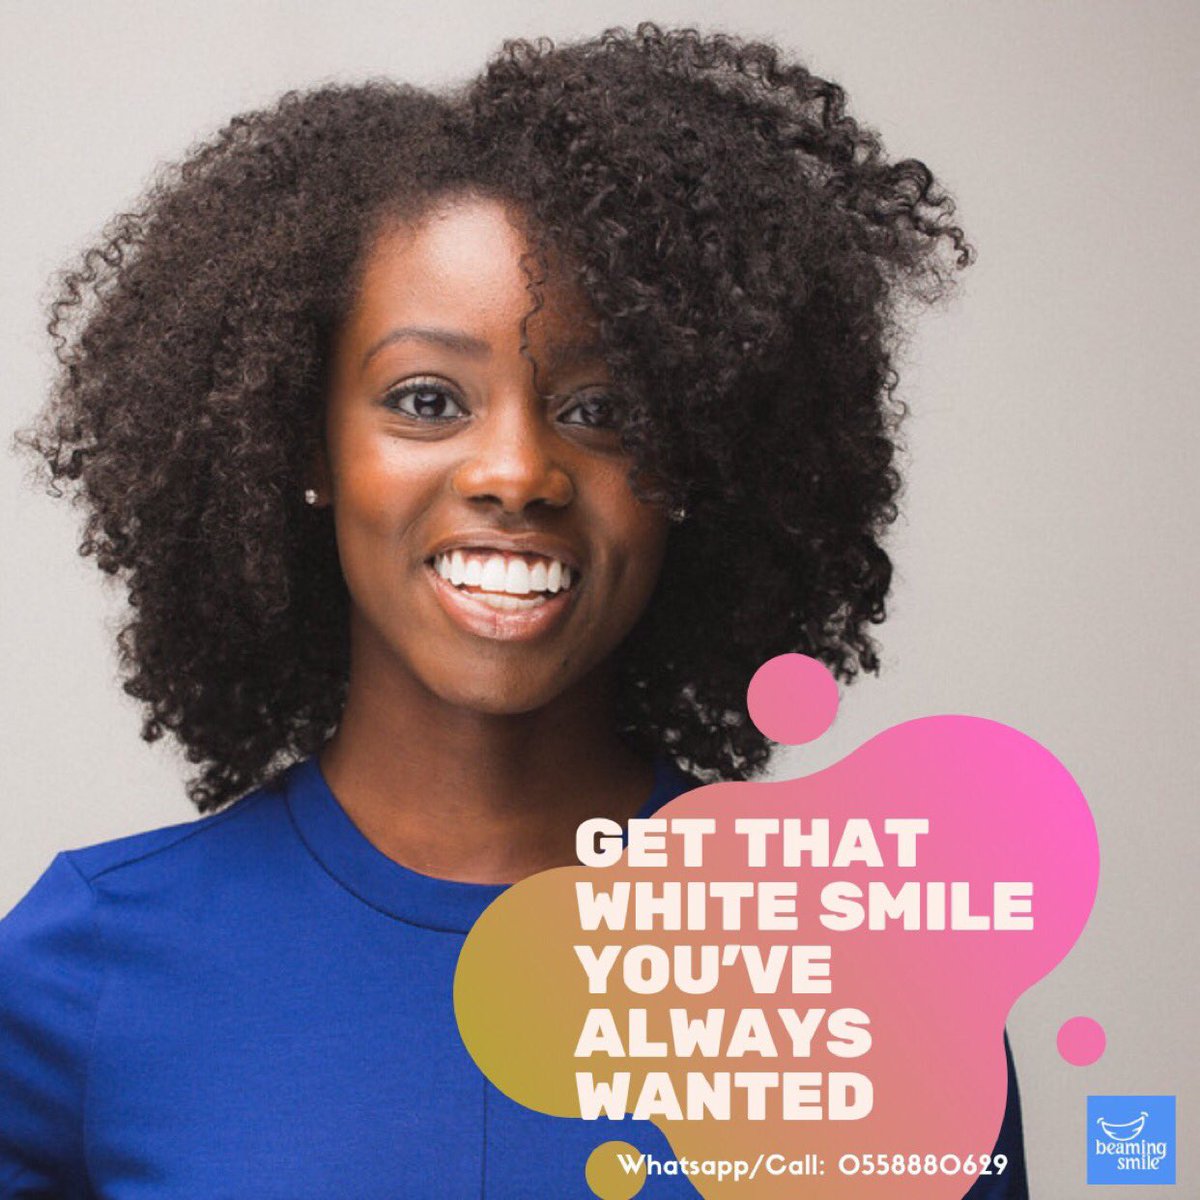 It's not just about teeth, it's about confidence, joy and the beauty that radiates from within. Walk ins for teeth whitening is accepted.

#beamingsmile #teethwhitening  Mercy Johnson Asamoah Gyan Adenta  Joyce Aryee